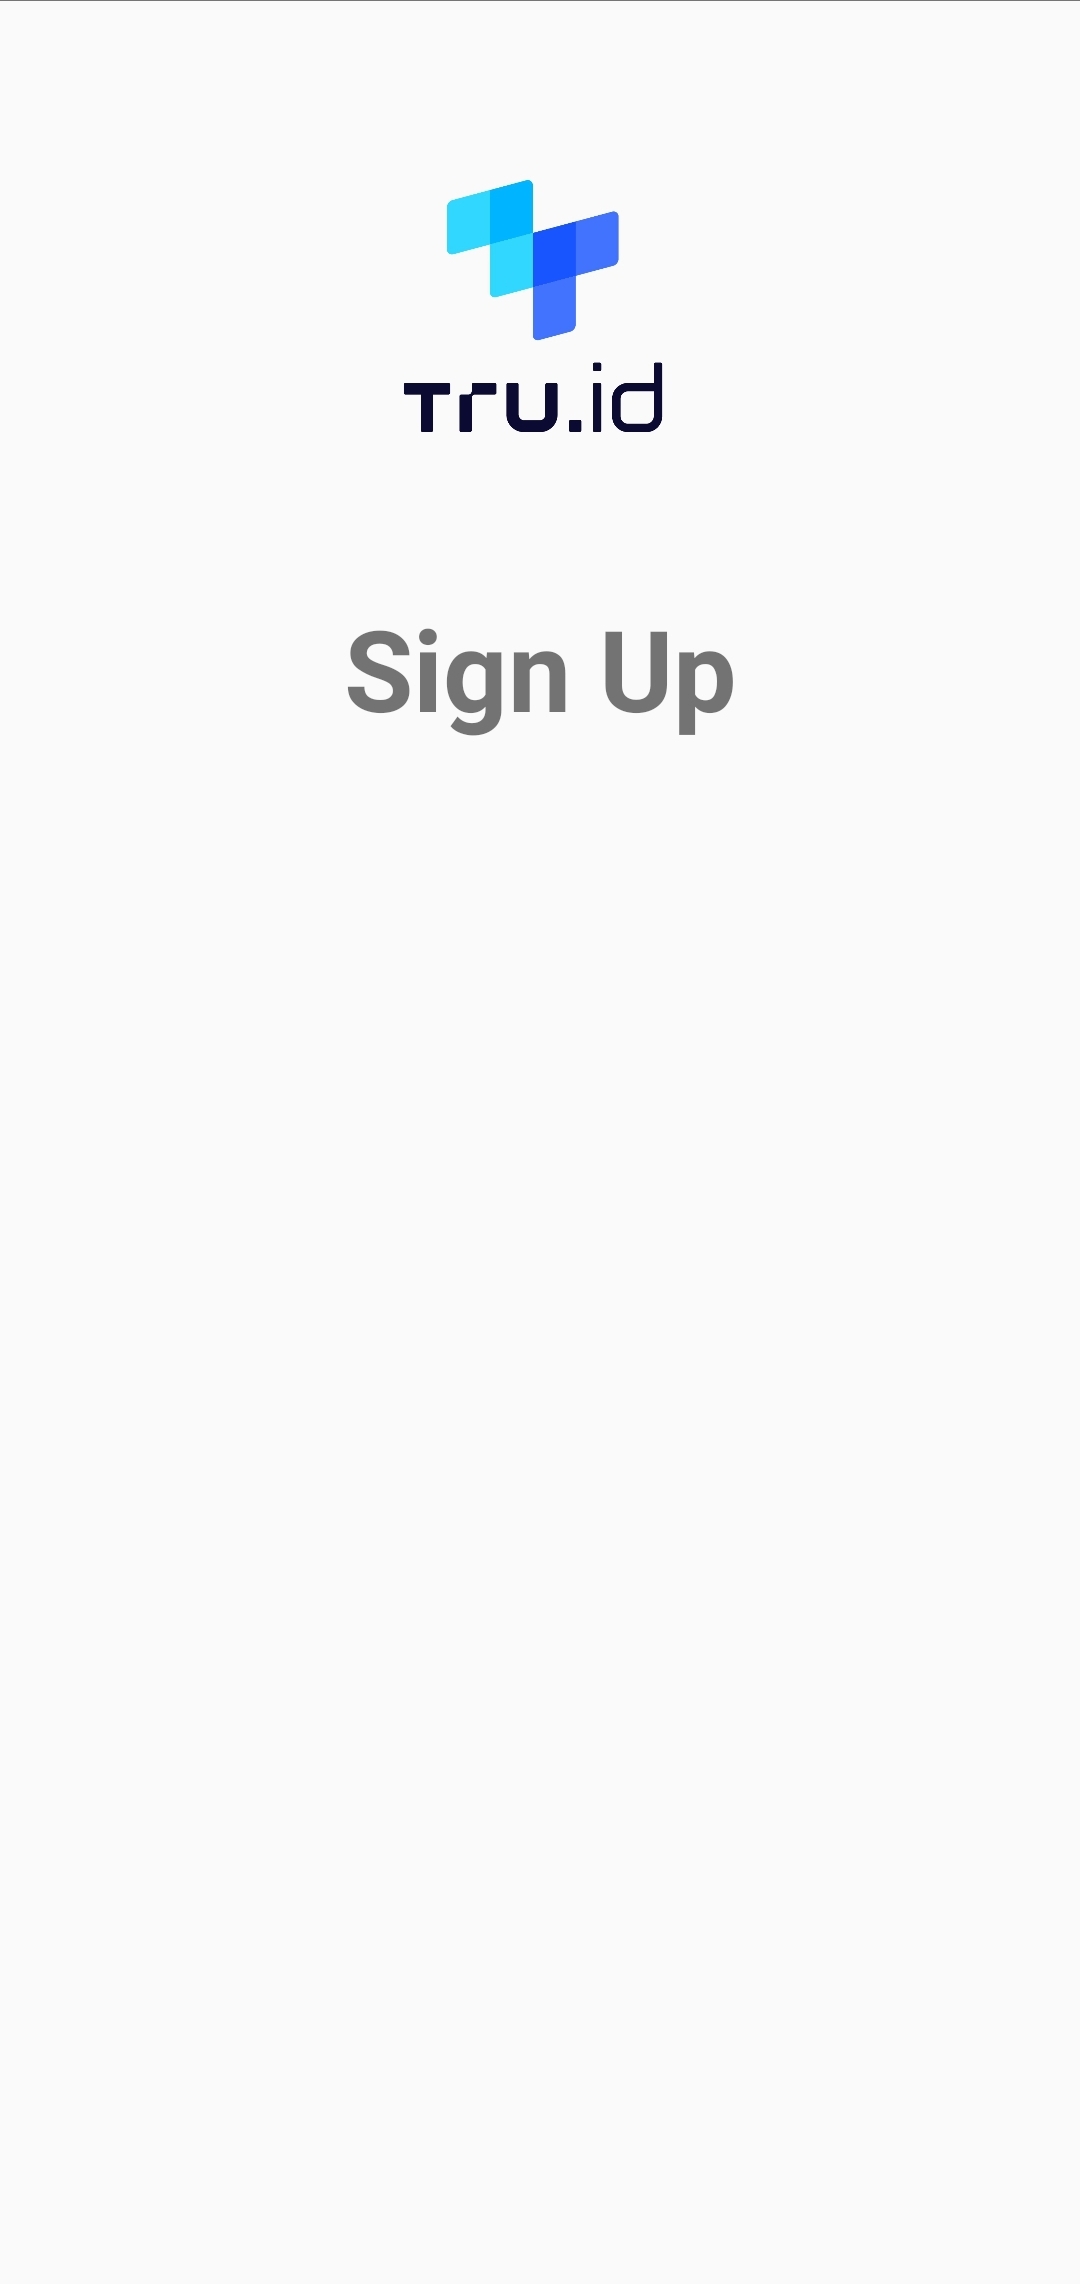 A screenshot of a mobile app with a grey background. The tru.ID logo is centered at the top, then below this is a darker grey label with 'Sign Up'.